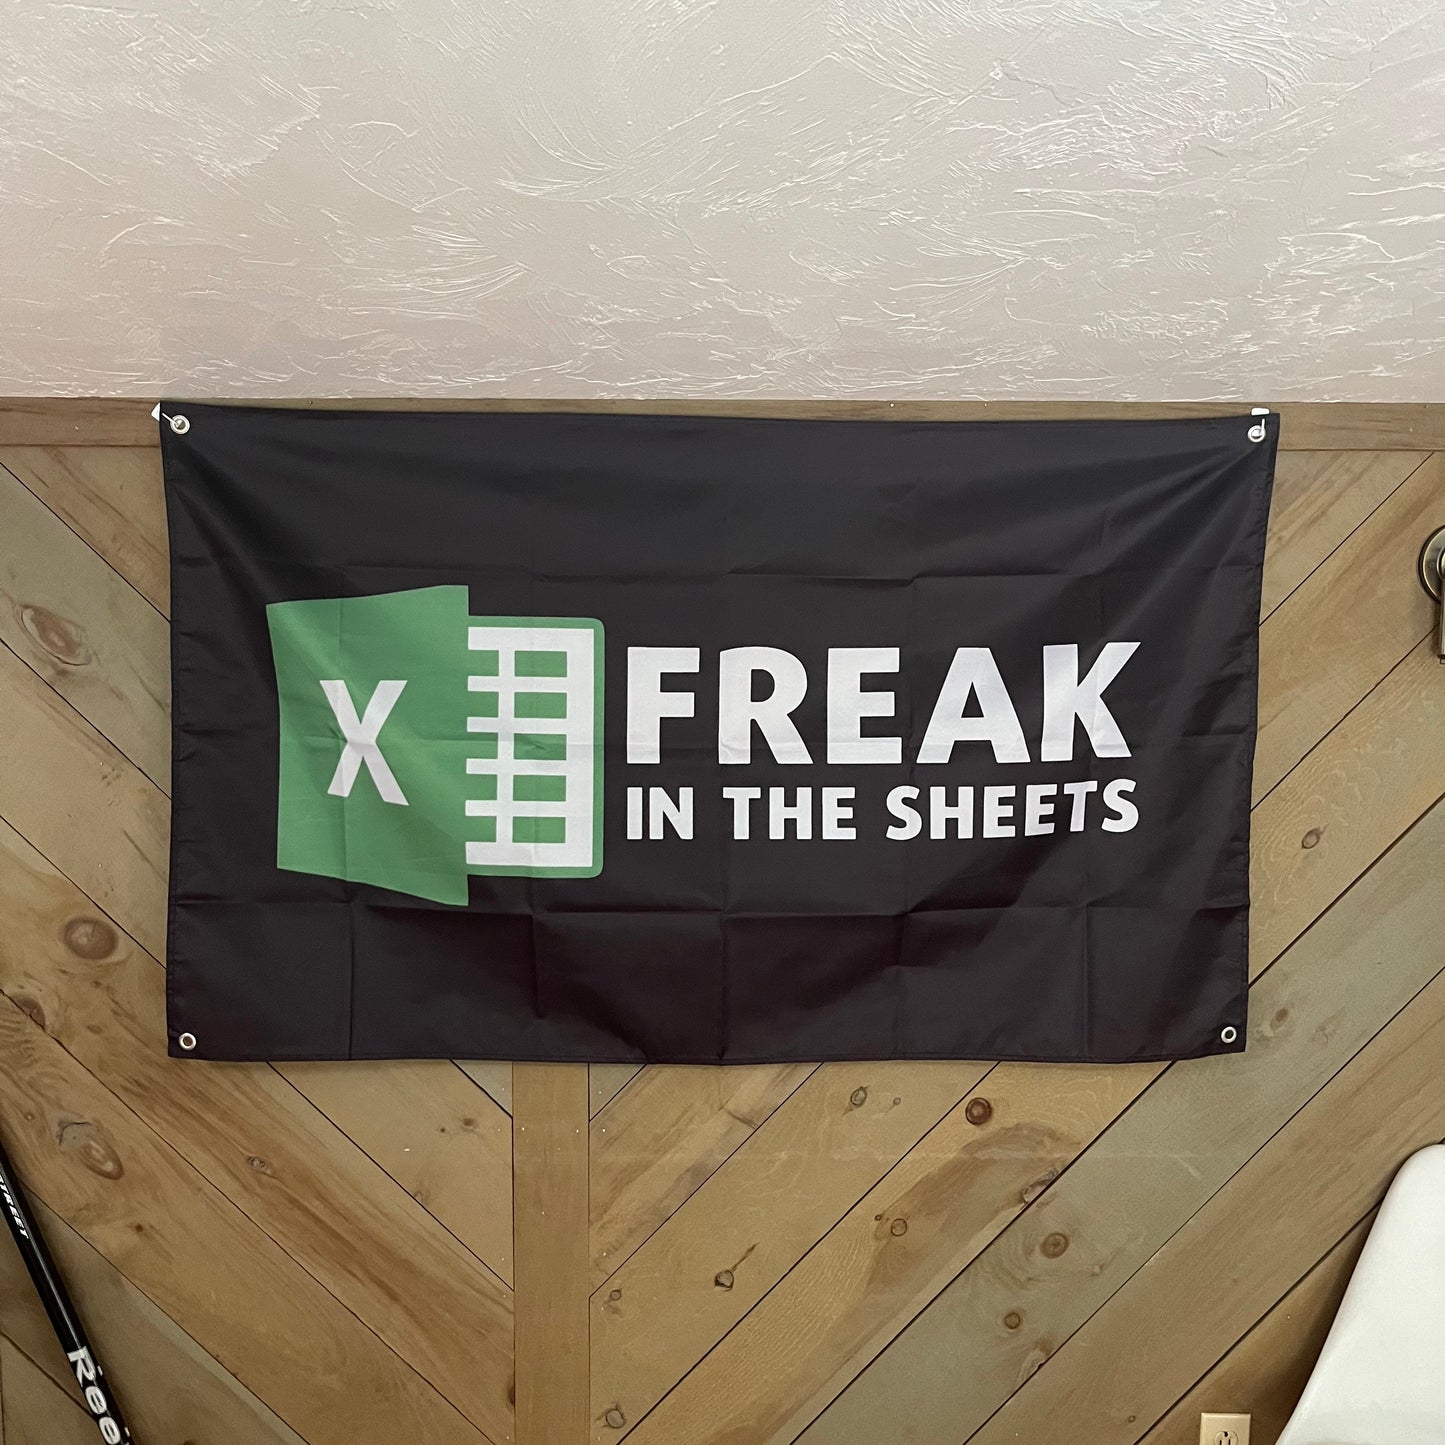 Freak in the Sheets flag displayed in a stylish room, emphasizing the clever Excel-themed design, perfect for tech-savvy individuals and office decorations.